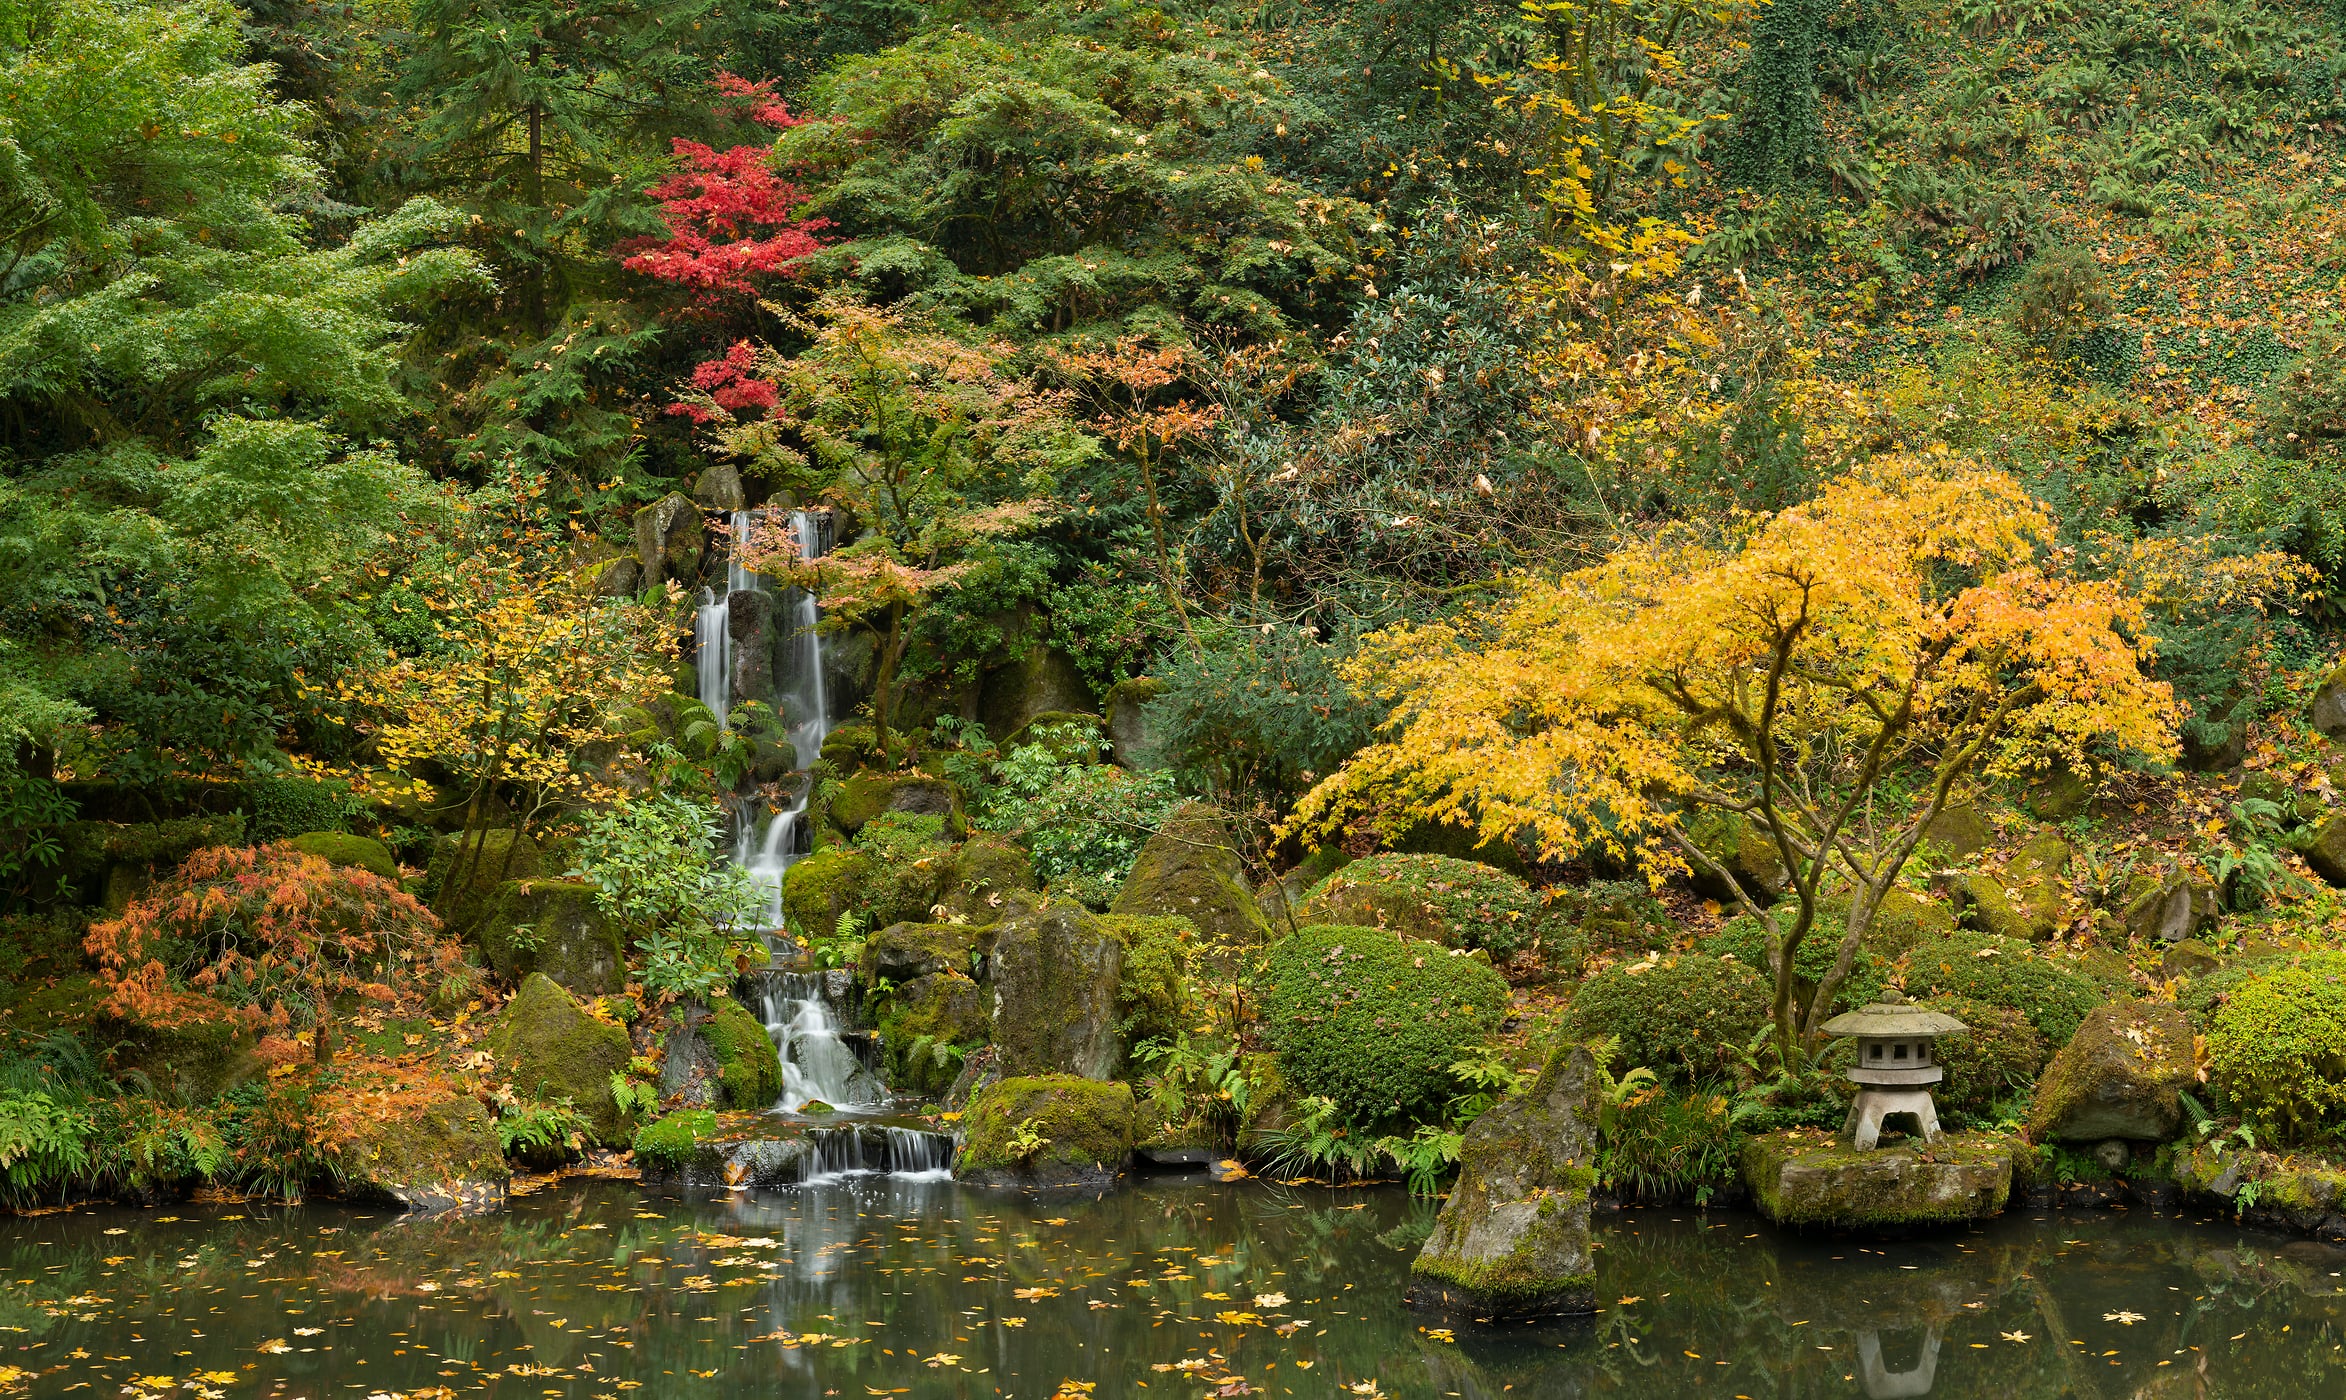 341 megapixels! A very high resolution, large-format VAST photo print of a peaceful nature scene with a waterfall, pond, and autumn foliage; art photograph created by Greg Probst in Portland Japanese Garden, Portland, Oregon.